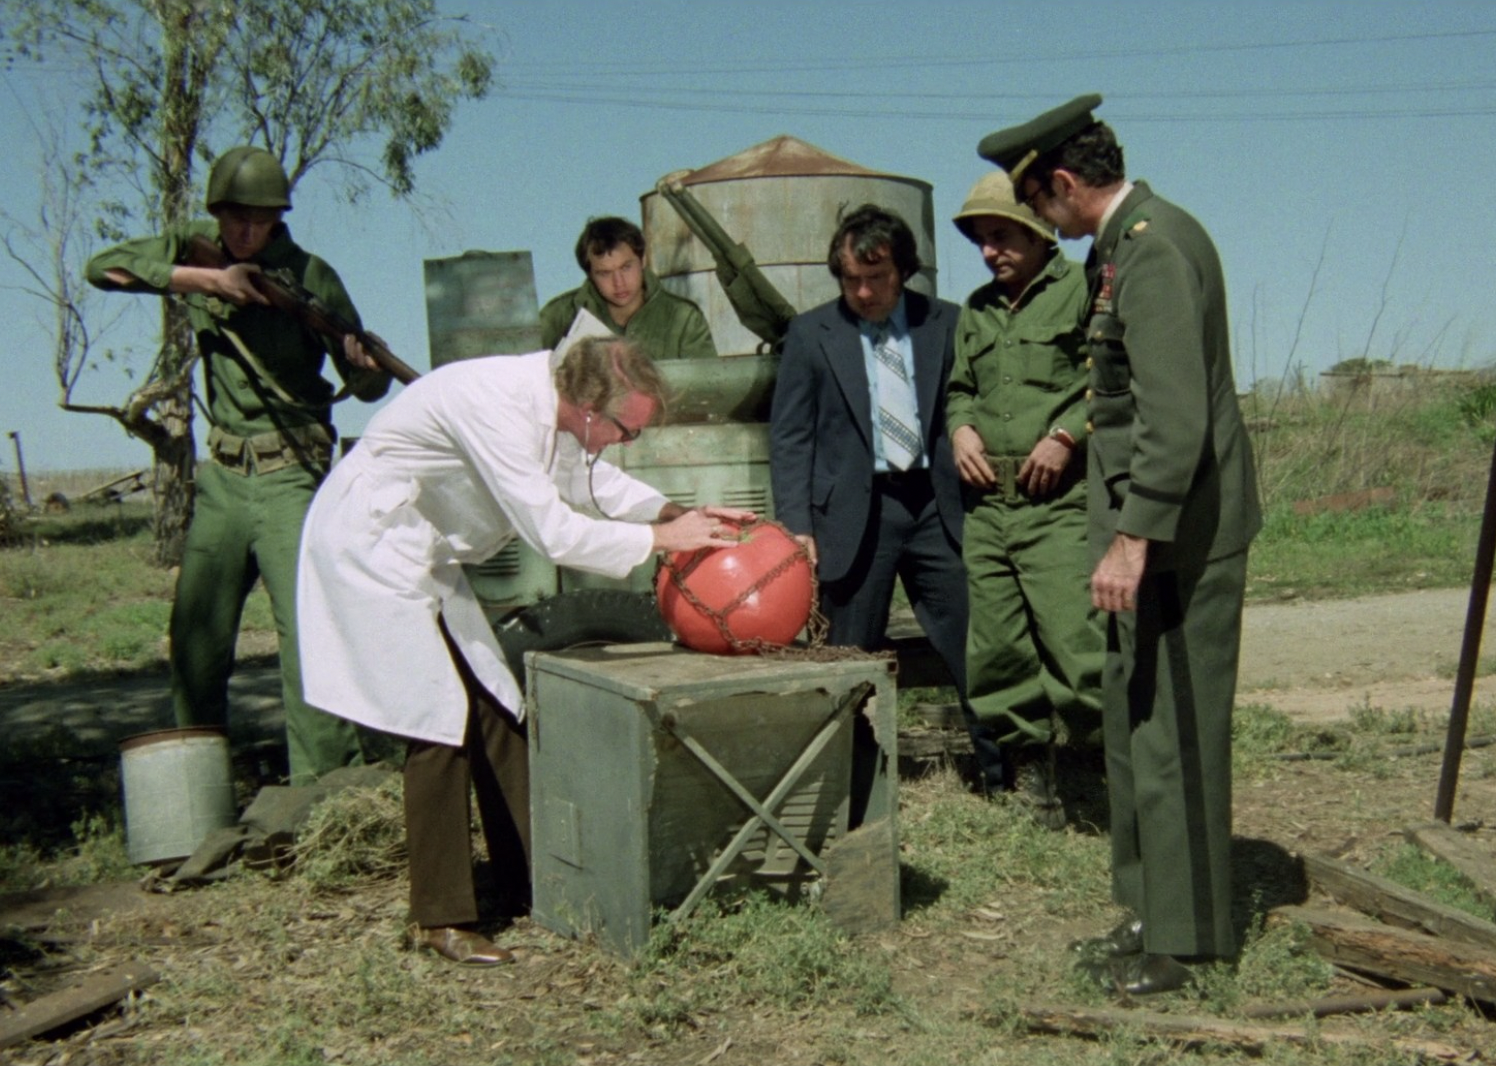 David Miller in a scene from "Attack of the Killer Tomatoes!"